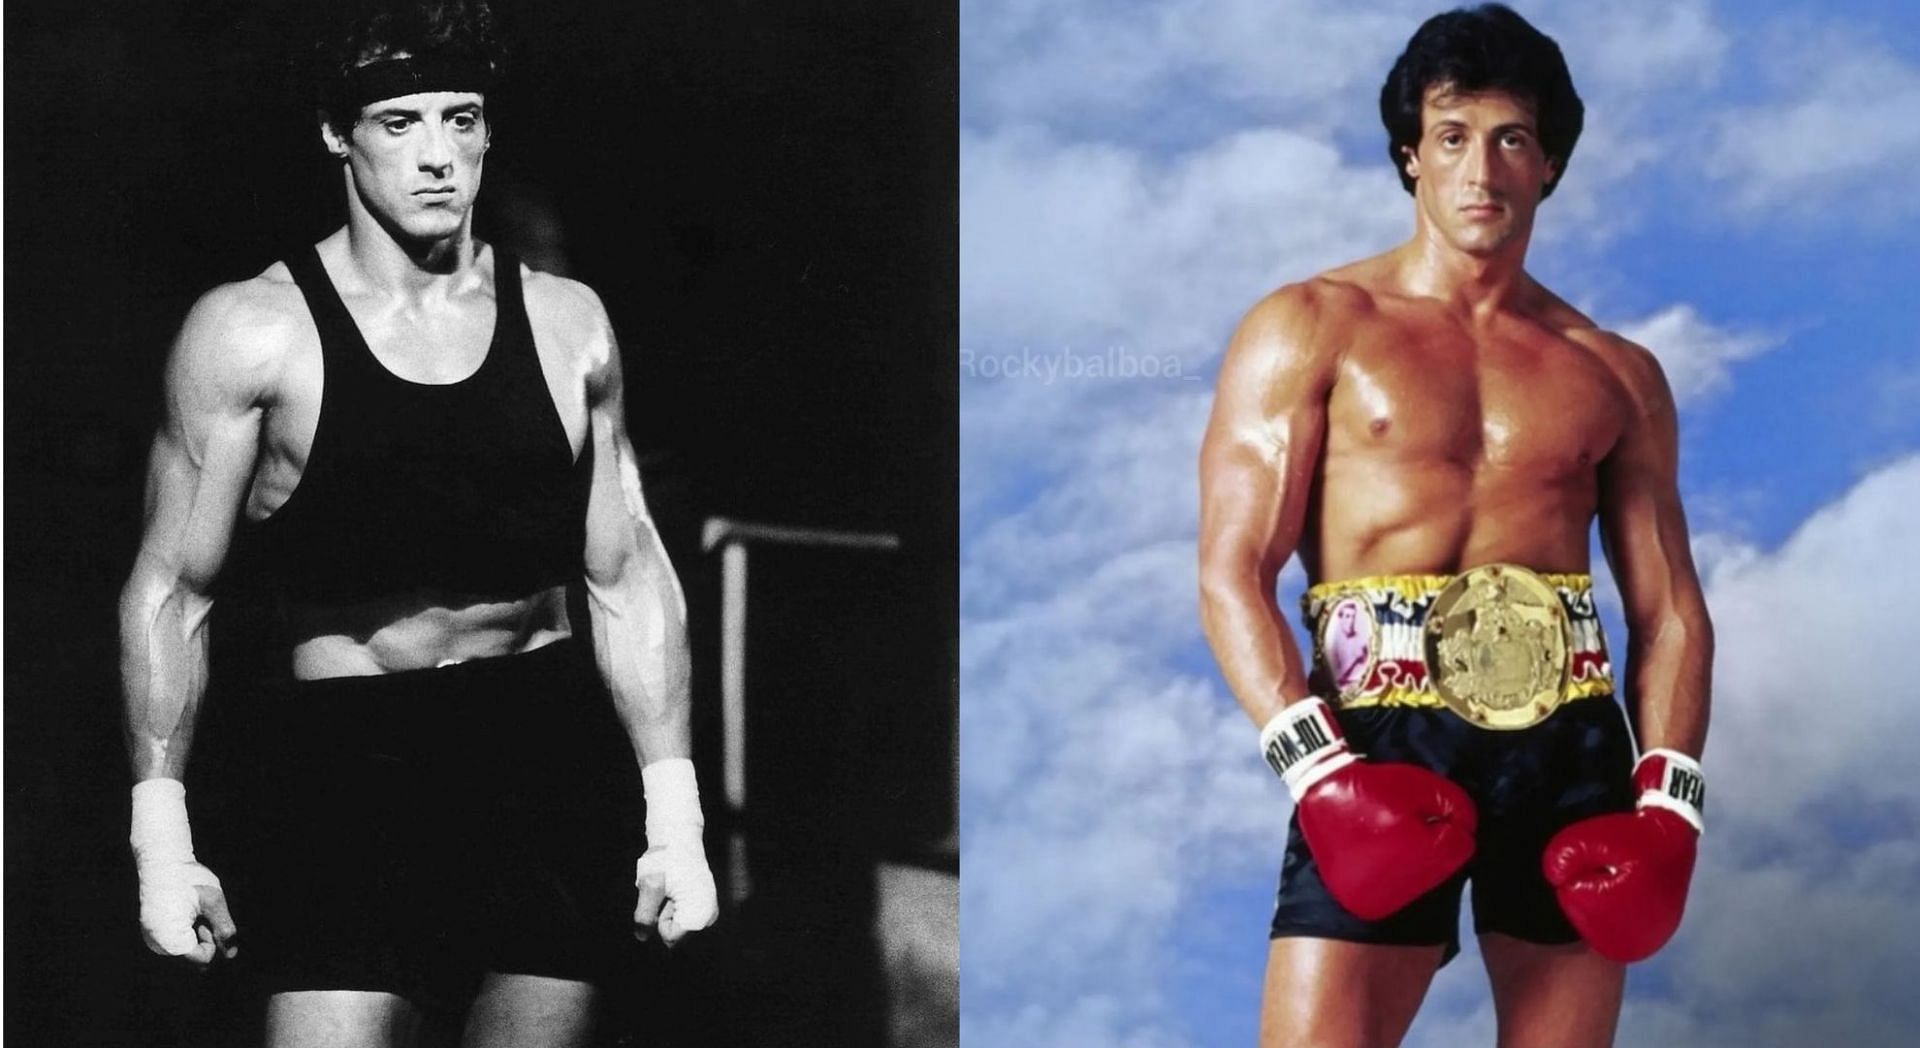 To get legendary arms like Sylvester Stallone, you will need to exercise your forearms as well as biceps (Image via Instagram)